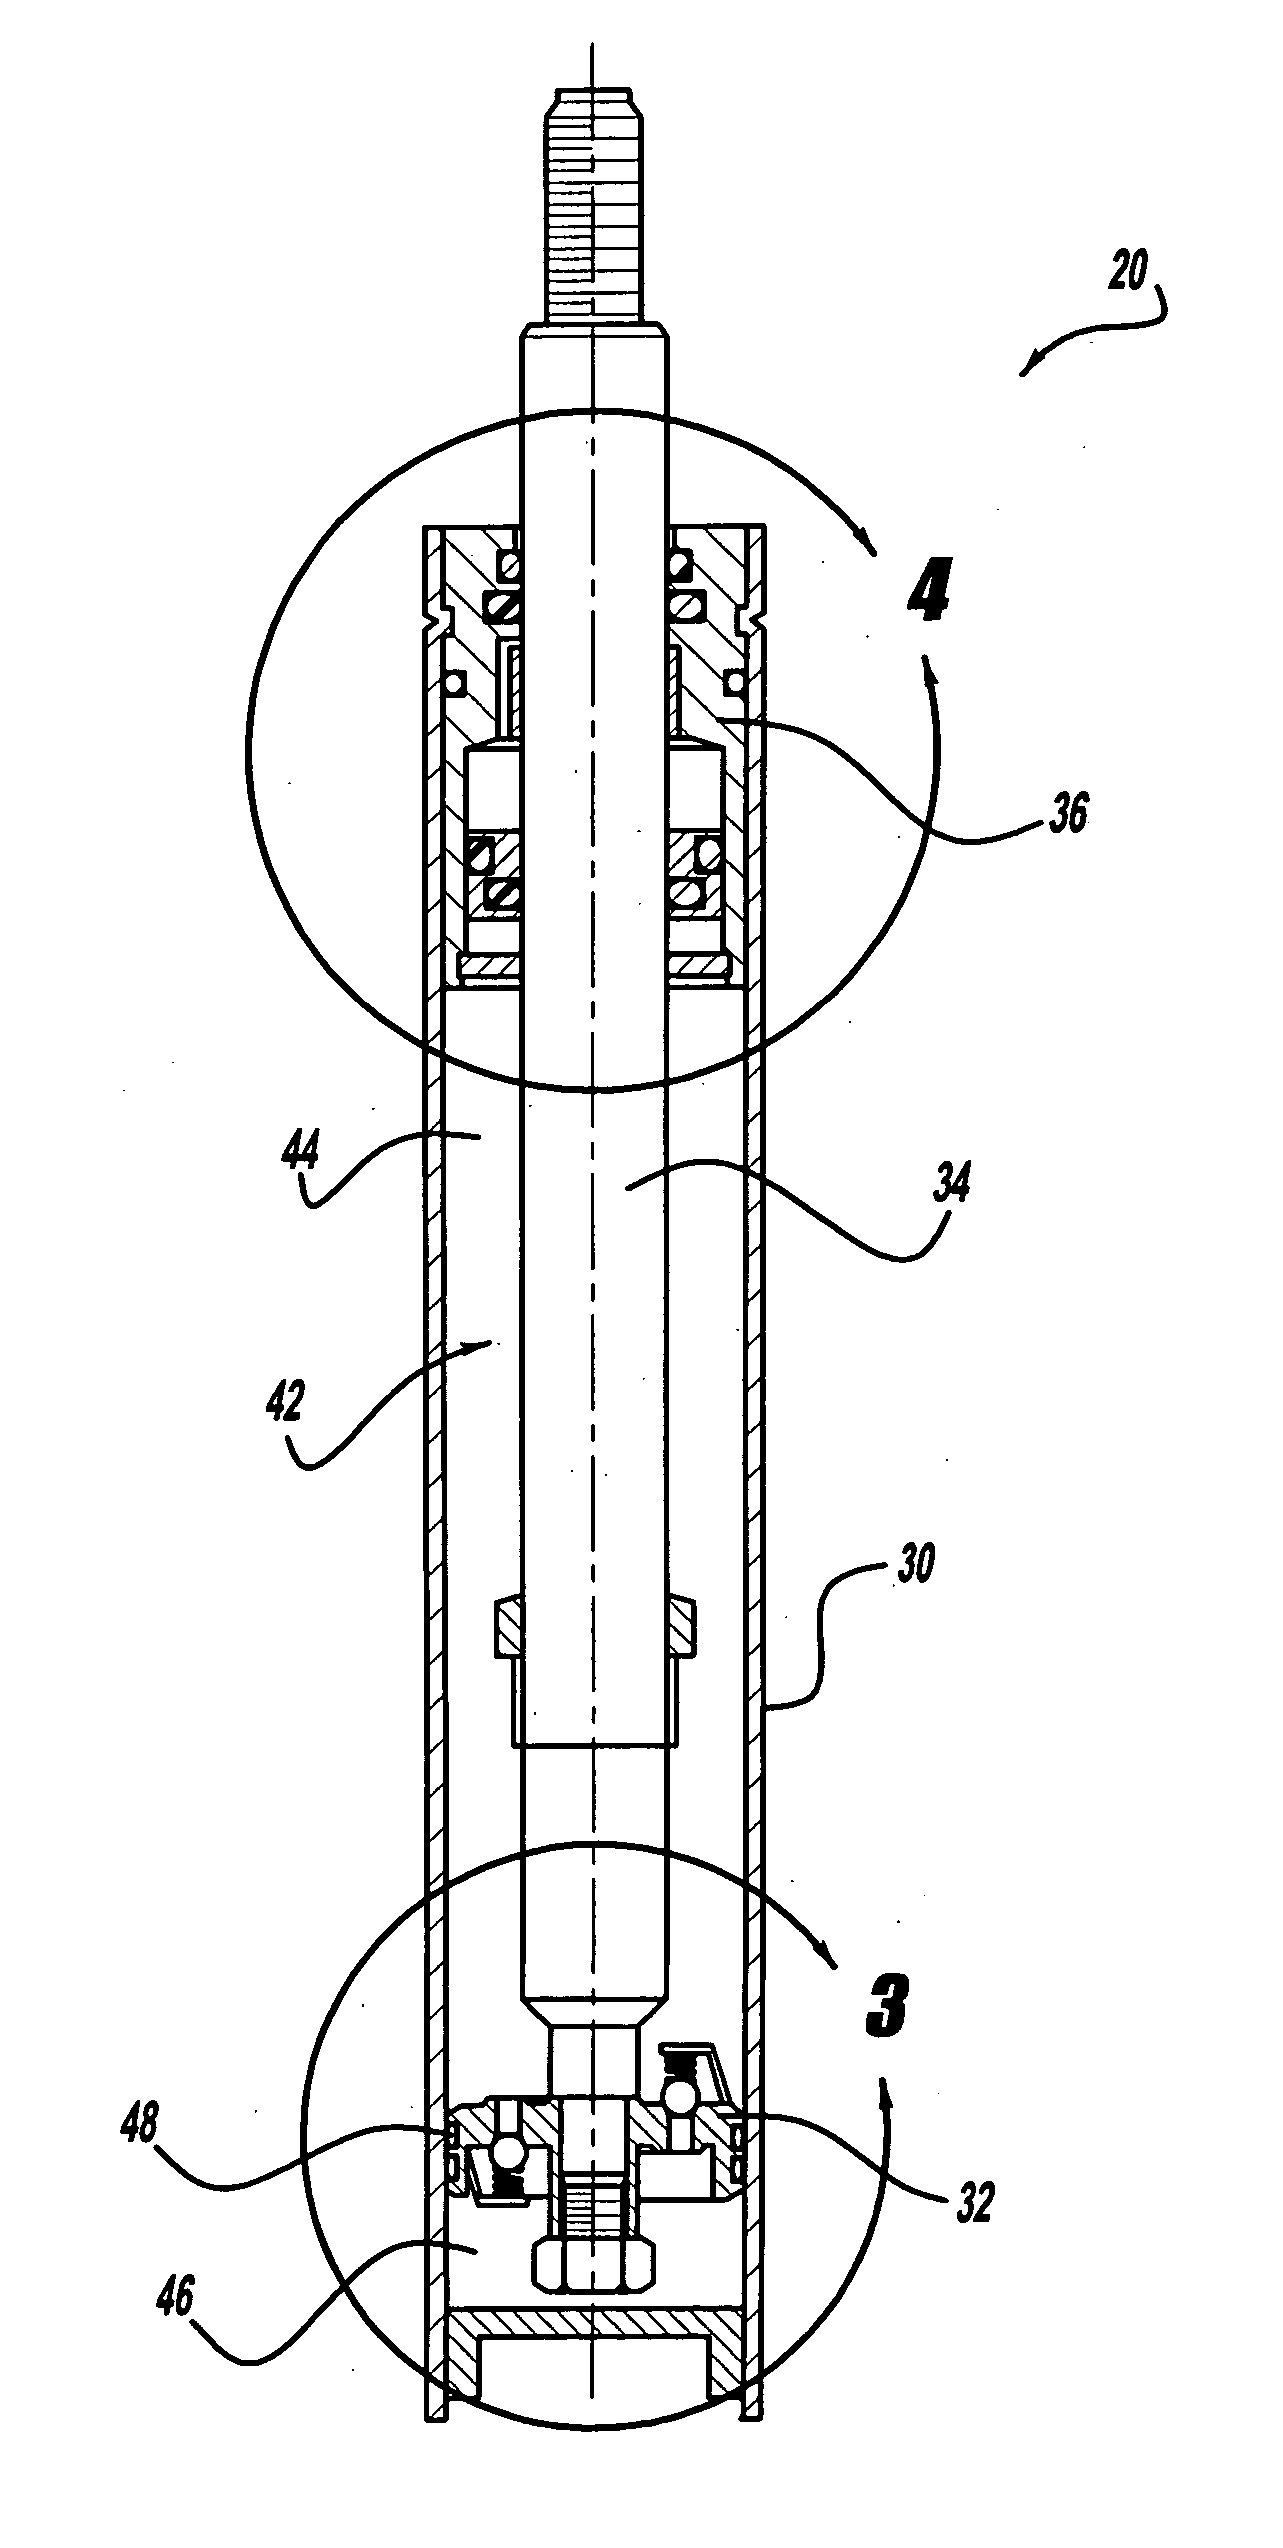 Rod guide and seal system for gas filled shock absorbers